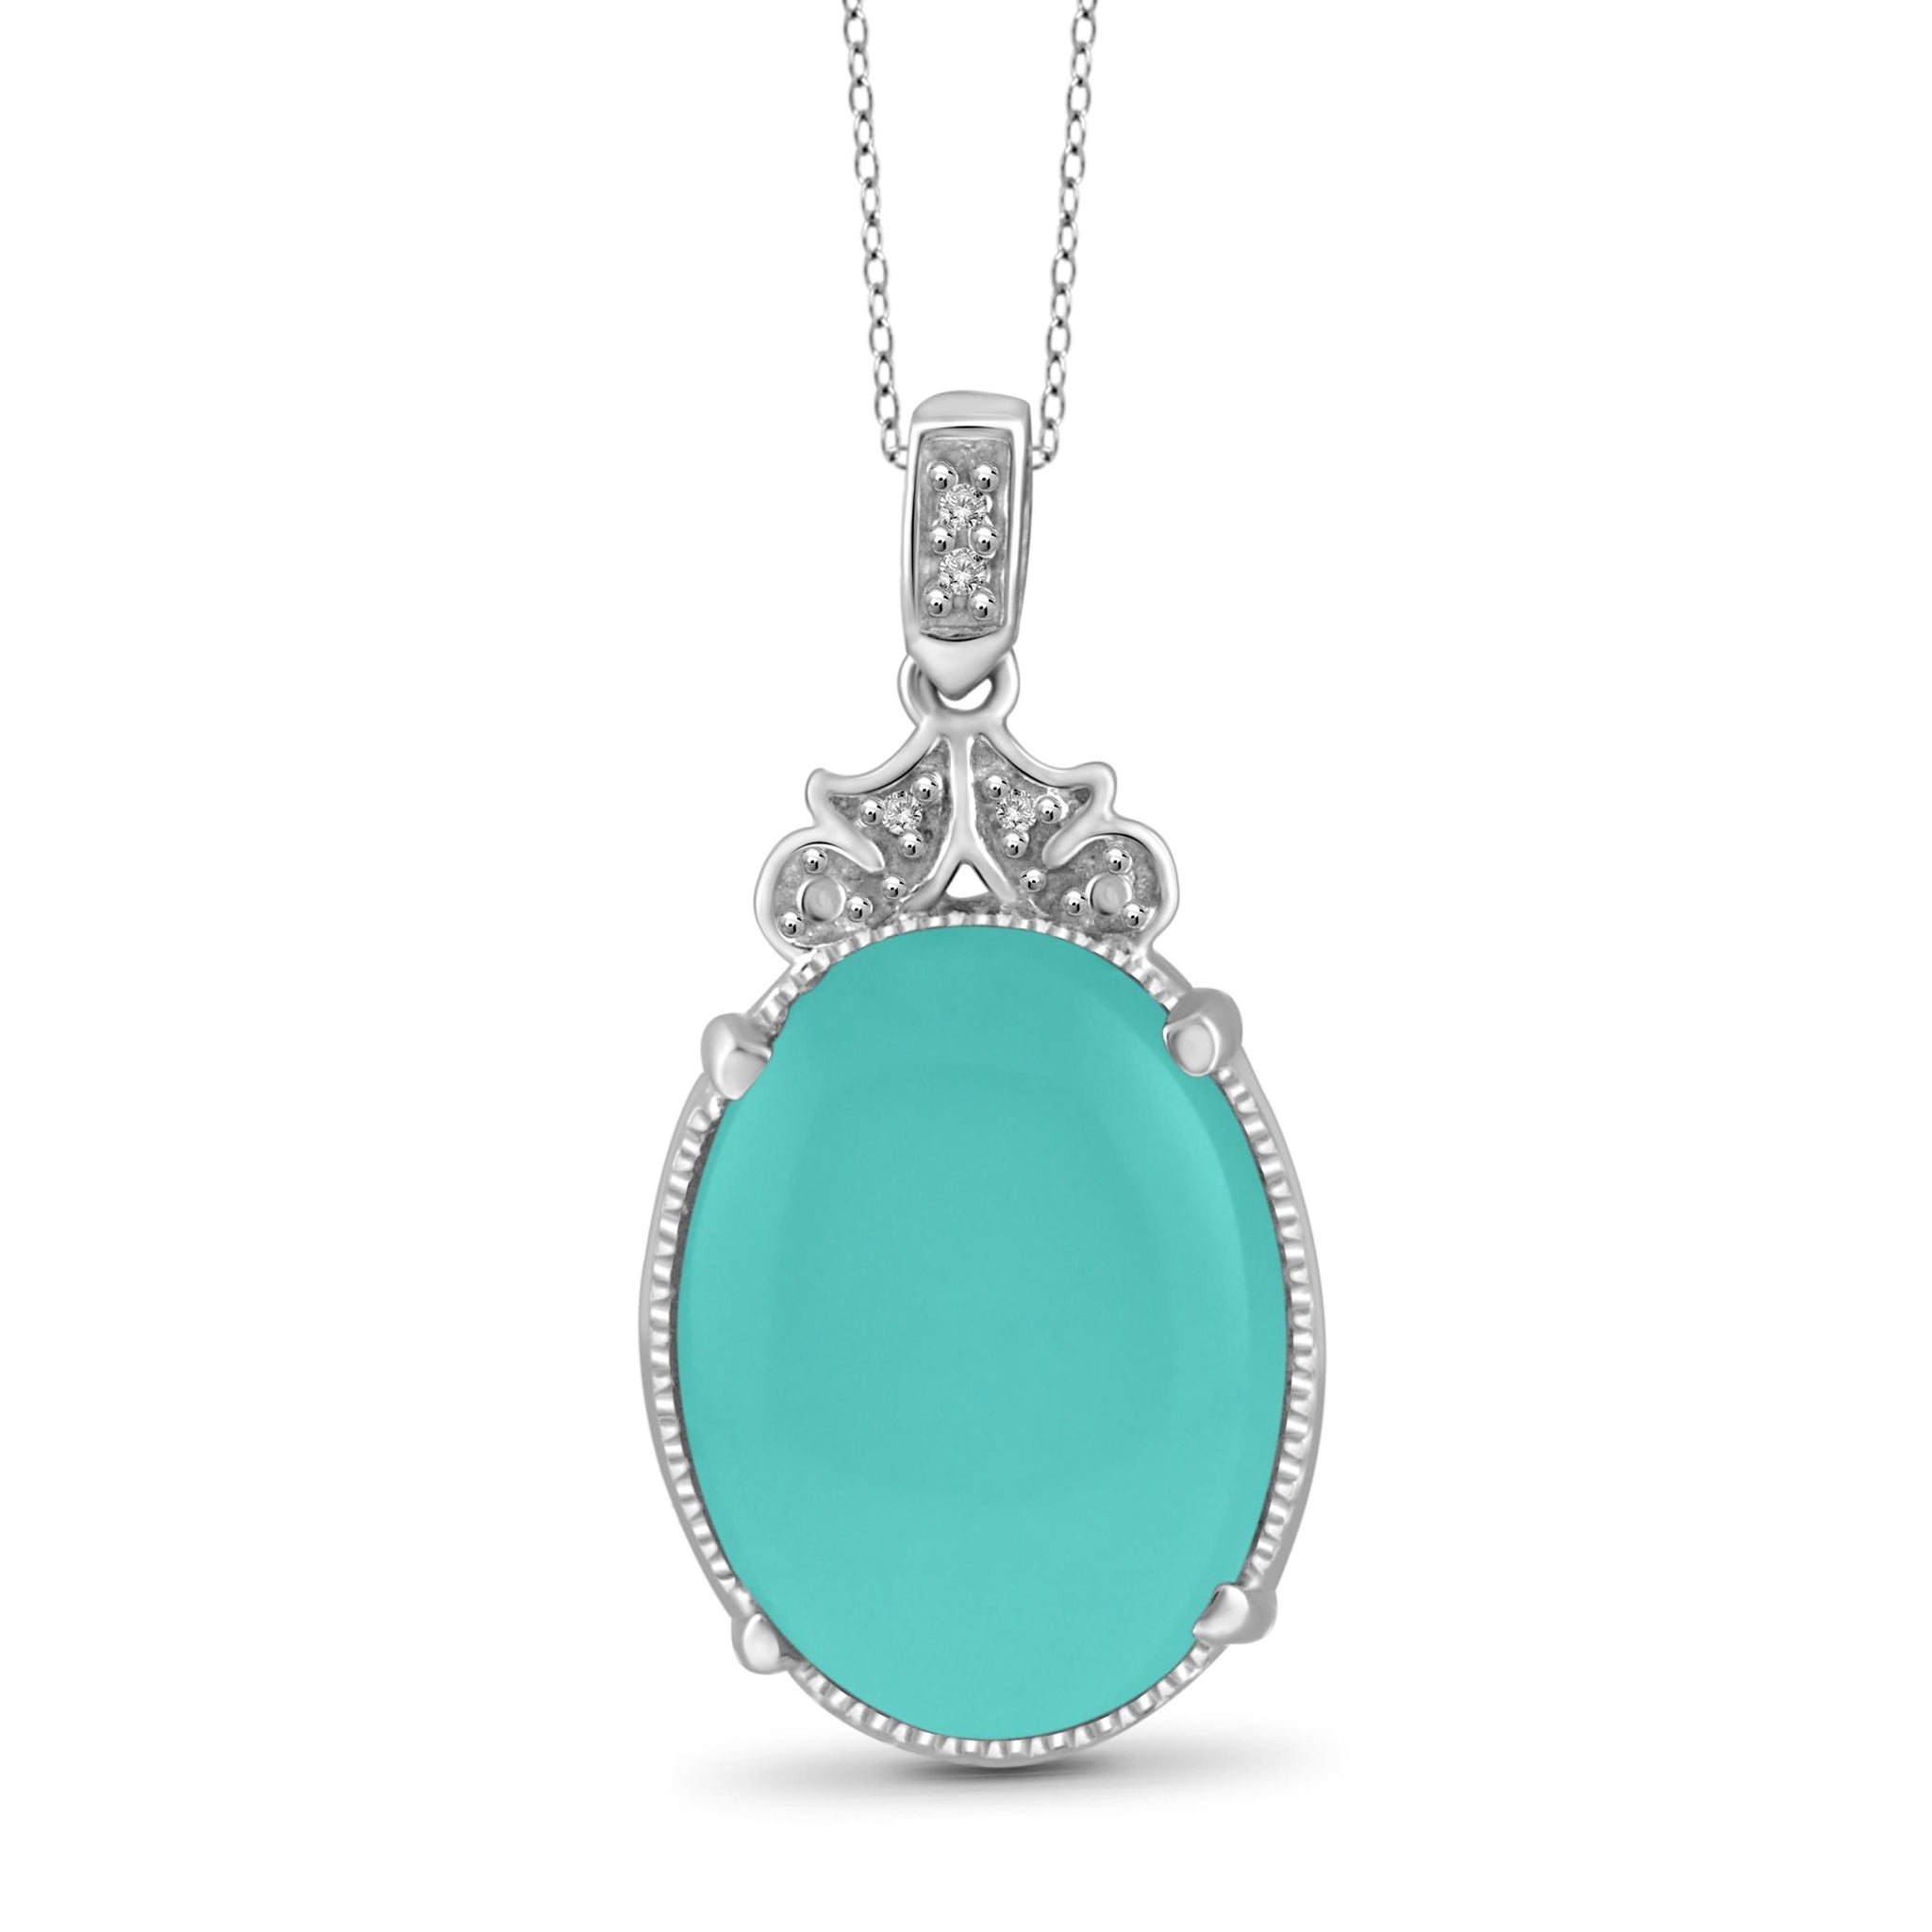 JewelonFire 9 3/4 Carat T.G.W. Chalcedony And White Diamond Accent Sterling Silver Fashion Pendant - Assorted Colors